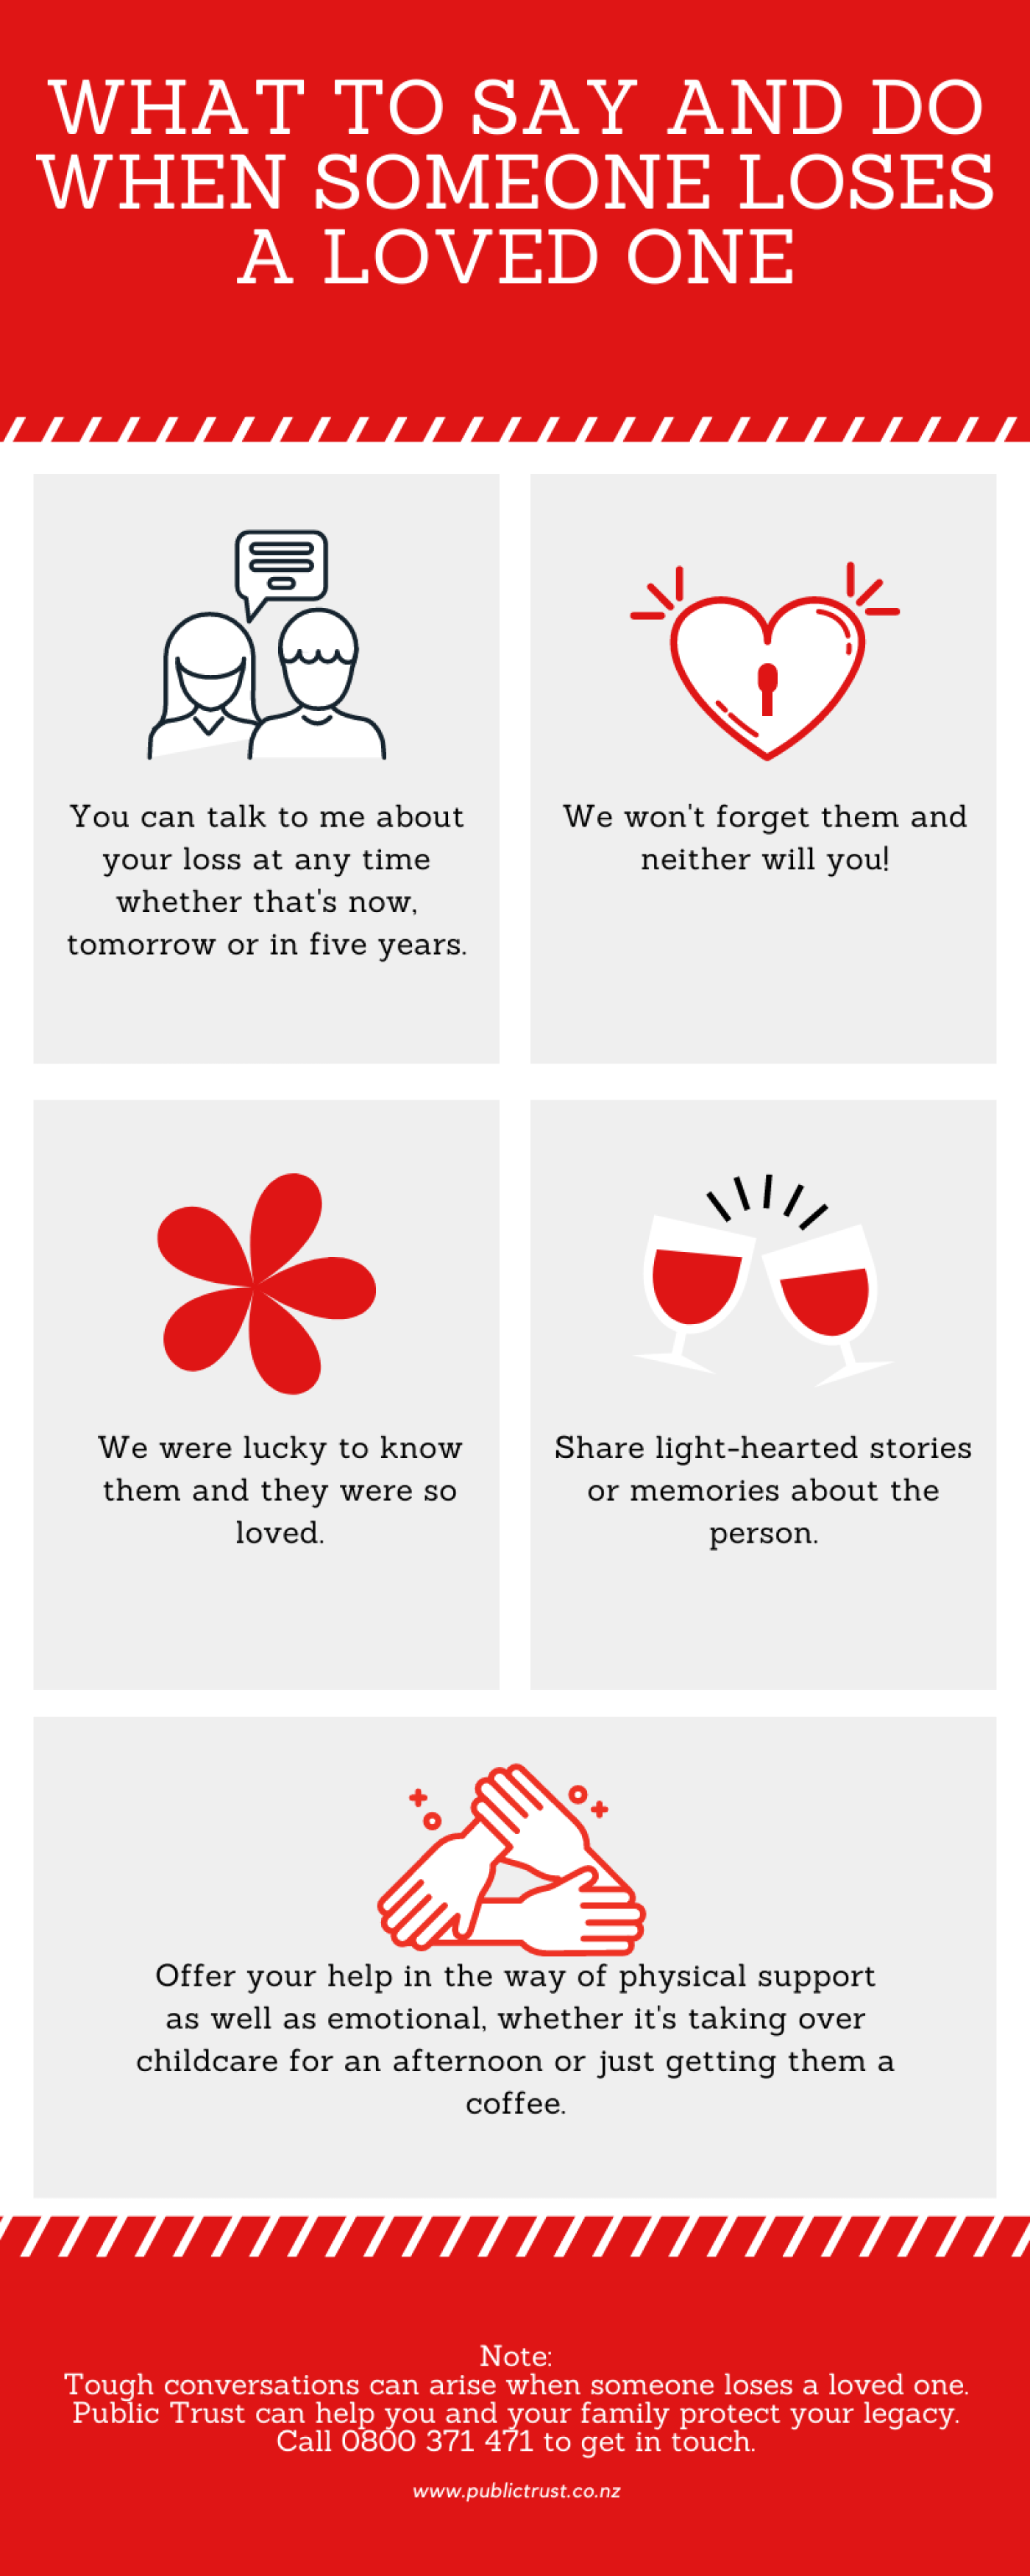 What to say when someone loses a loved one